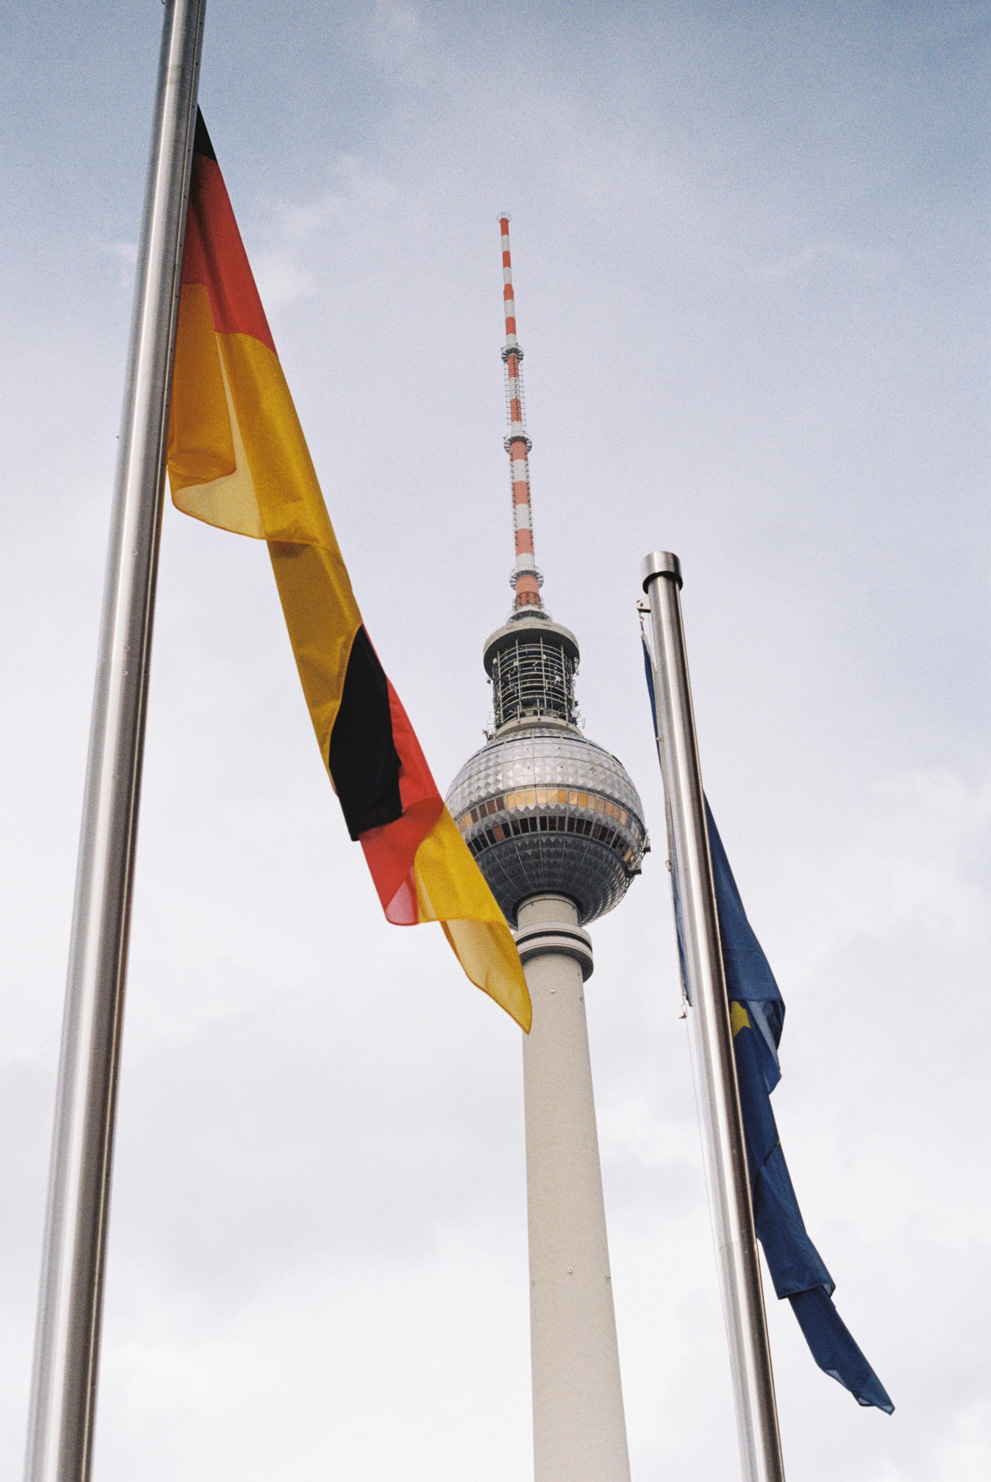 The Berlin TV tower with the flags of Germany and the European Union in the foreground. Shot on Kodak ColorPlus 200.